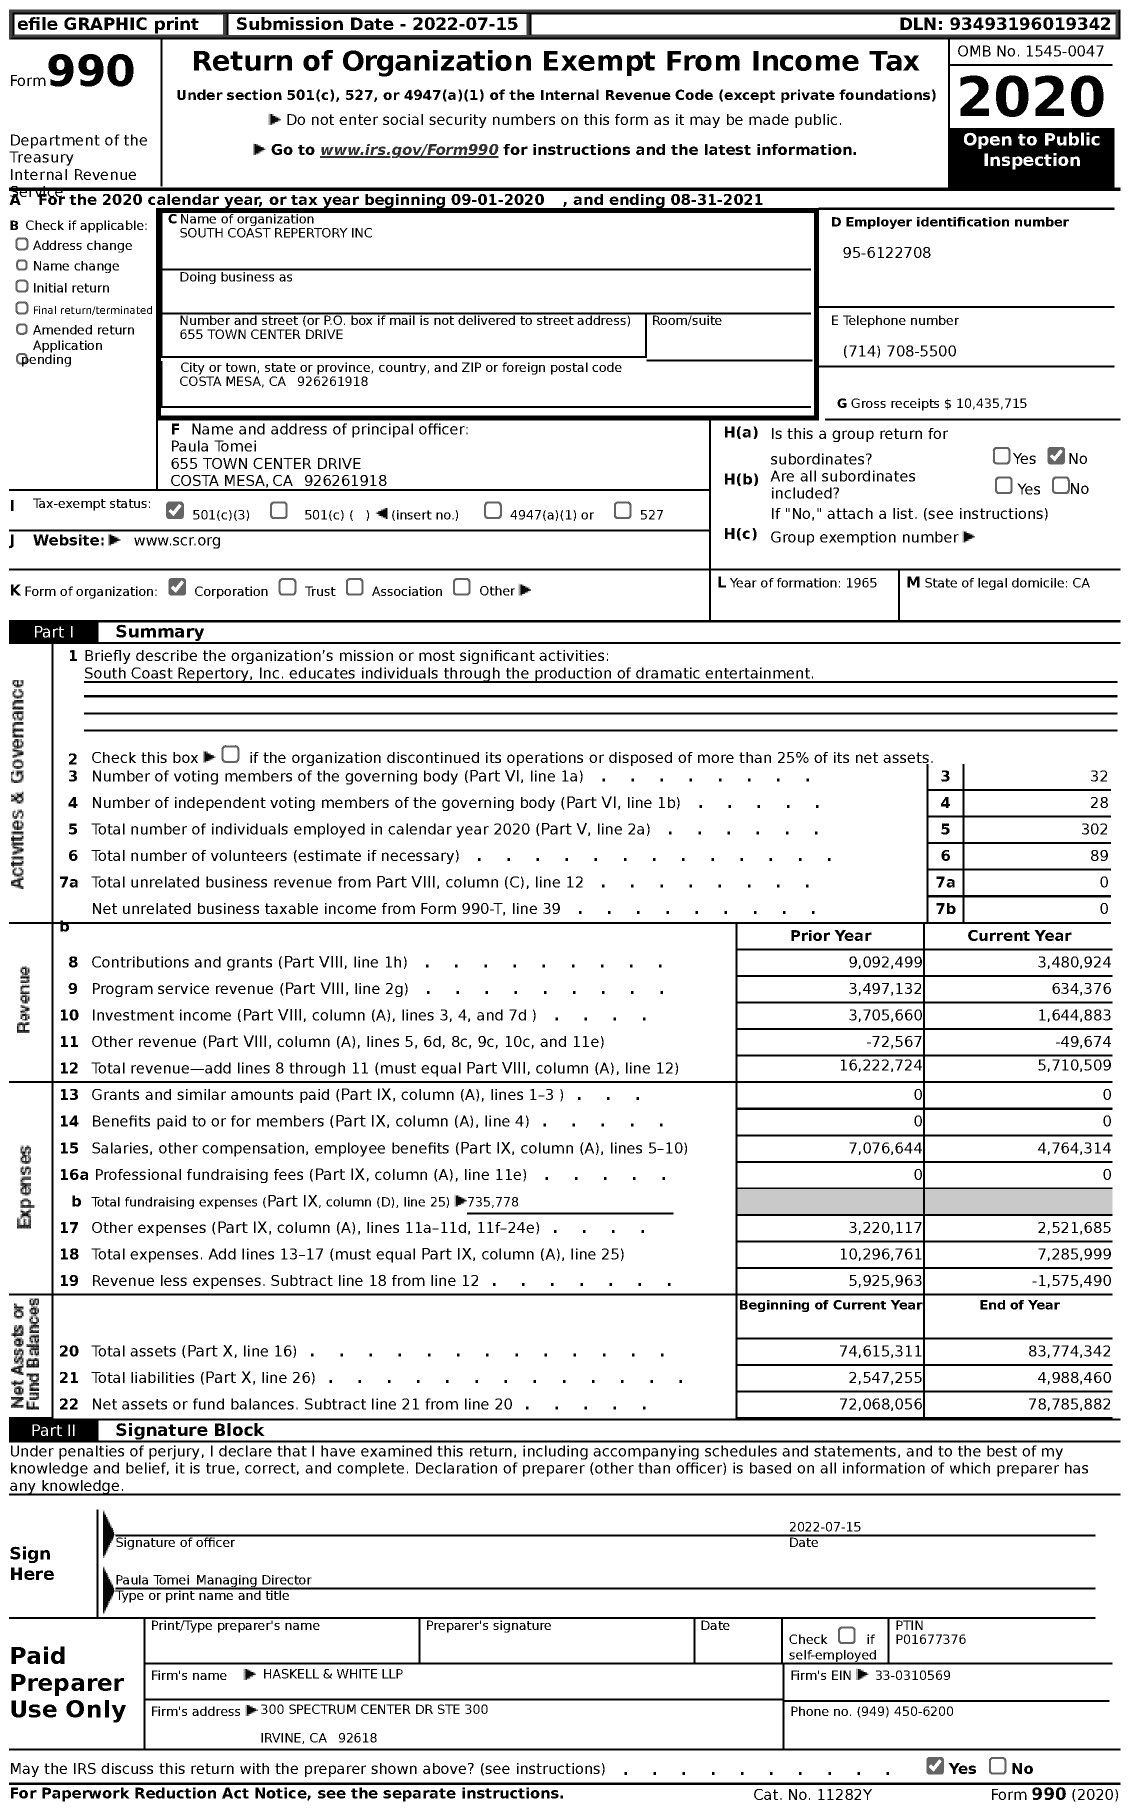 Image of first page of 2020 Form 990 for South Coast Repertory (SCR)